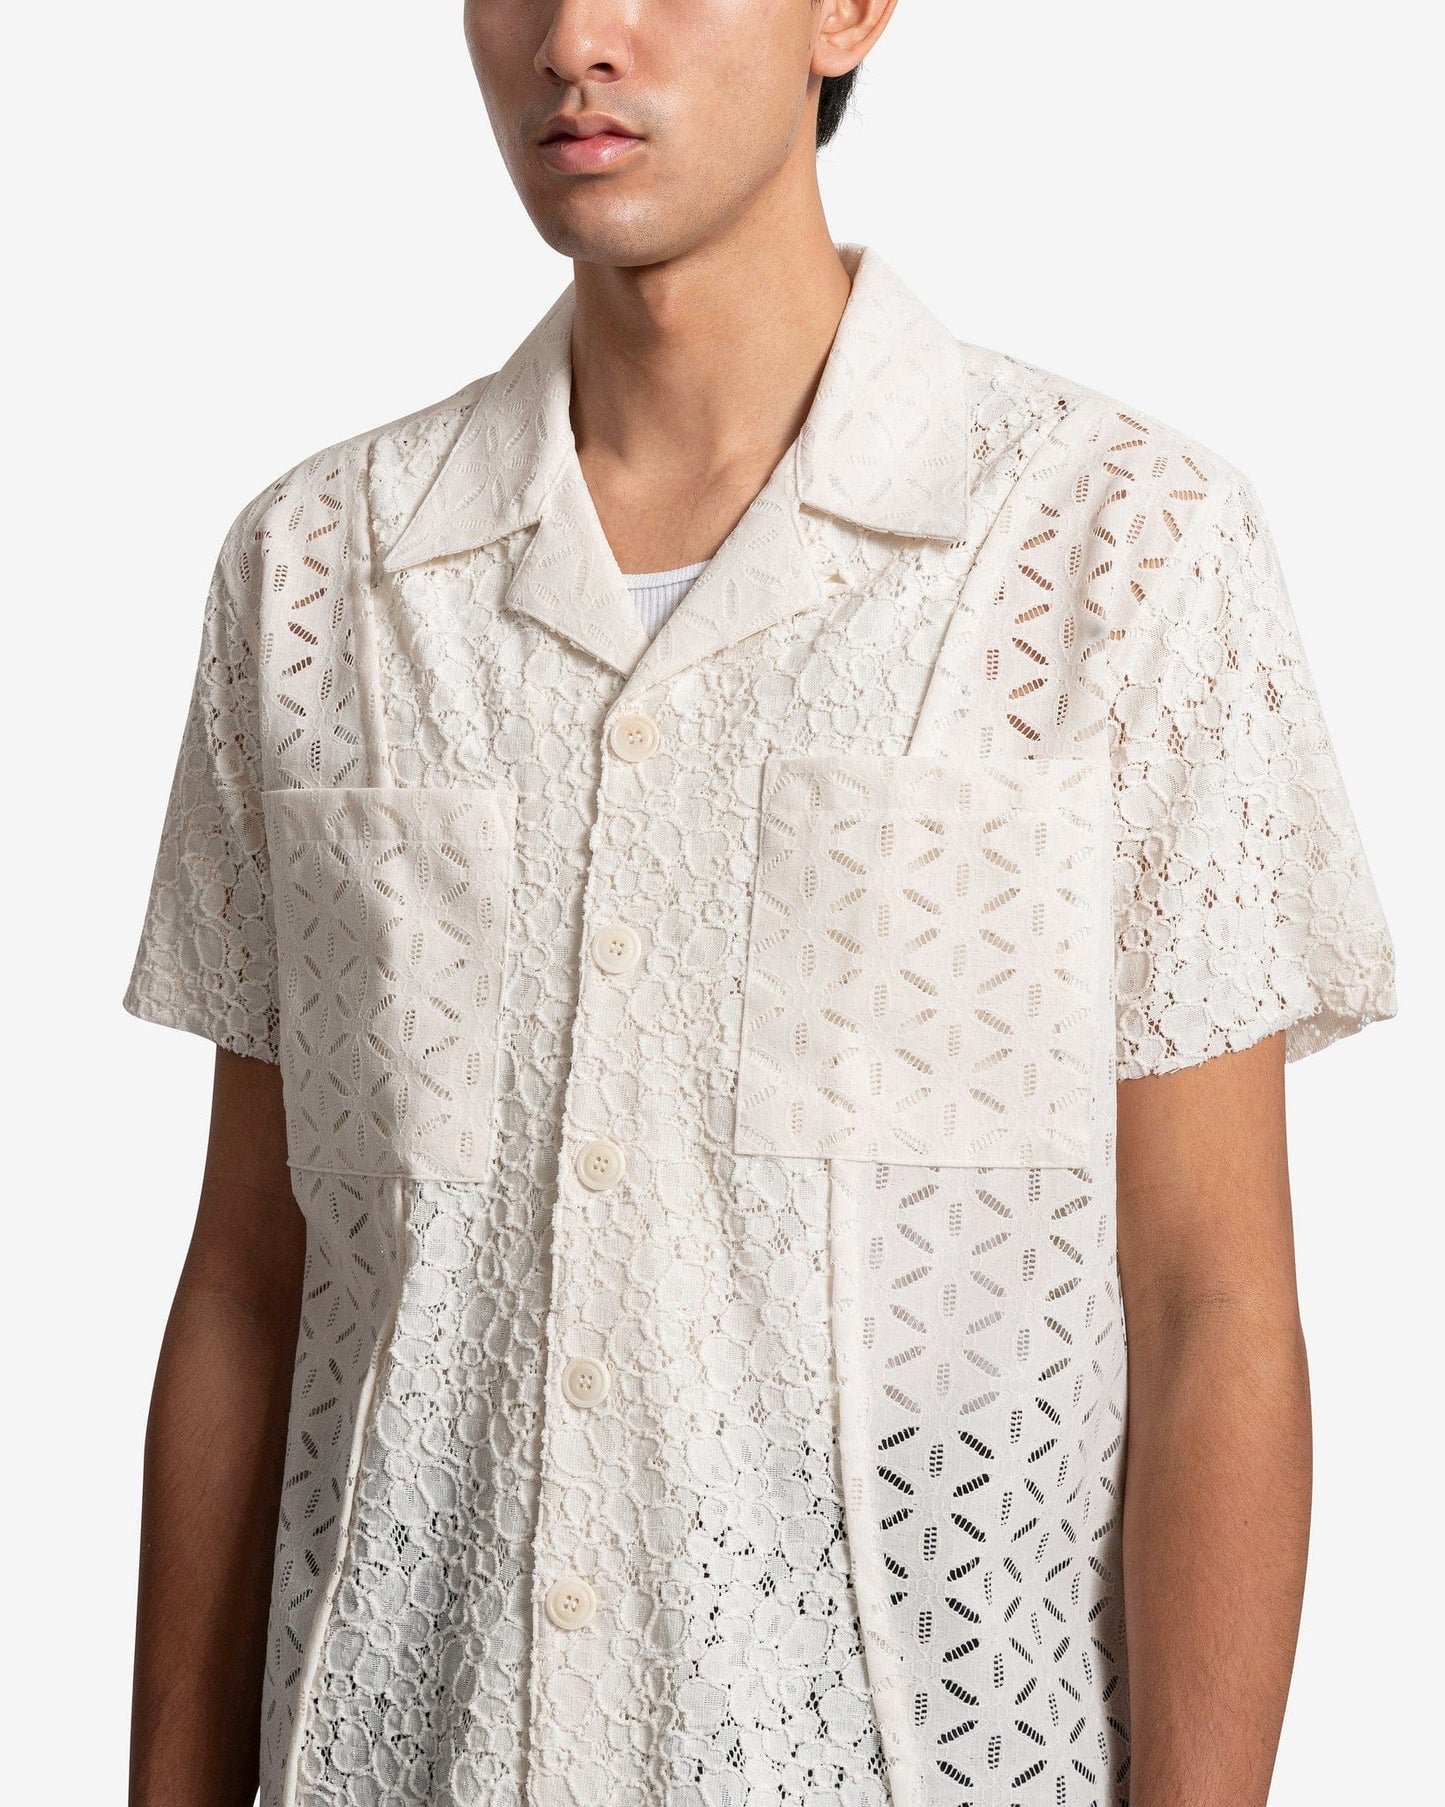 Andersson Bell Men's Shirts Half Sheer Flower Lace Shirt in Ecru